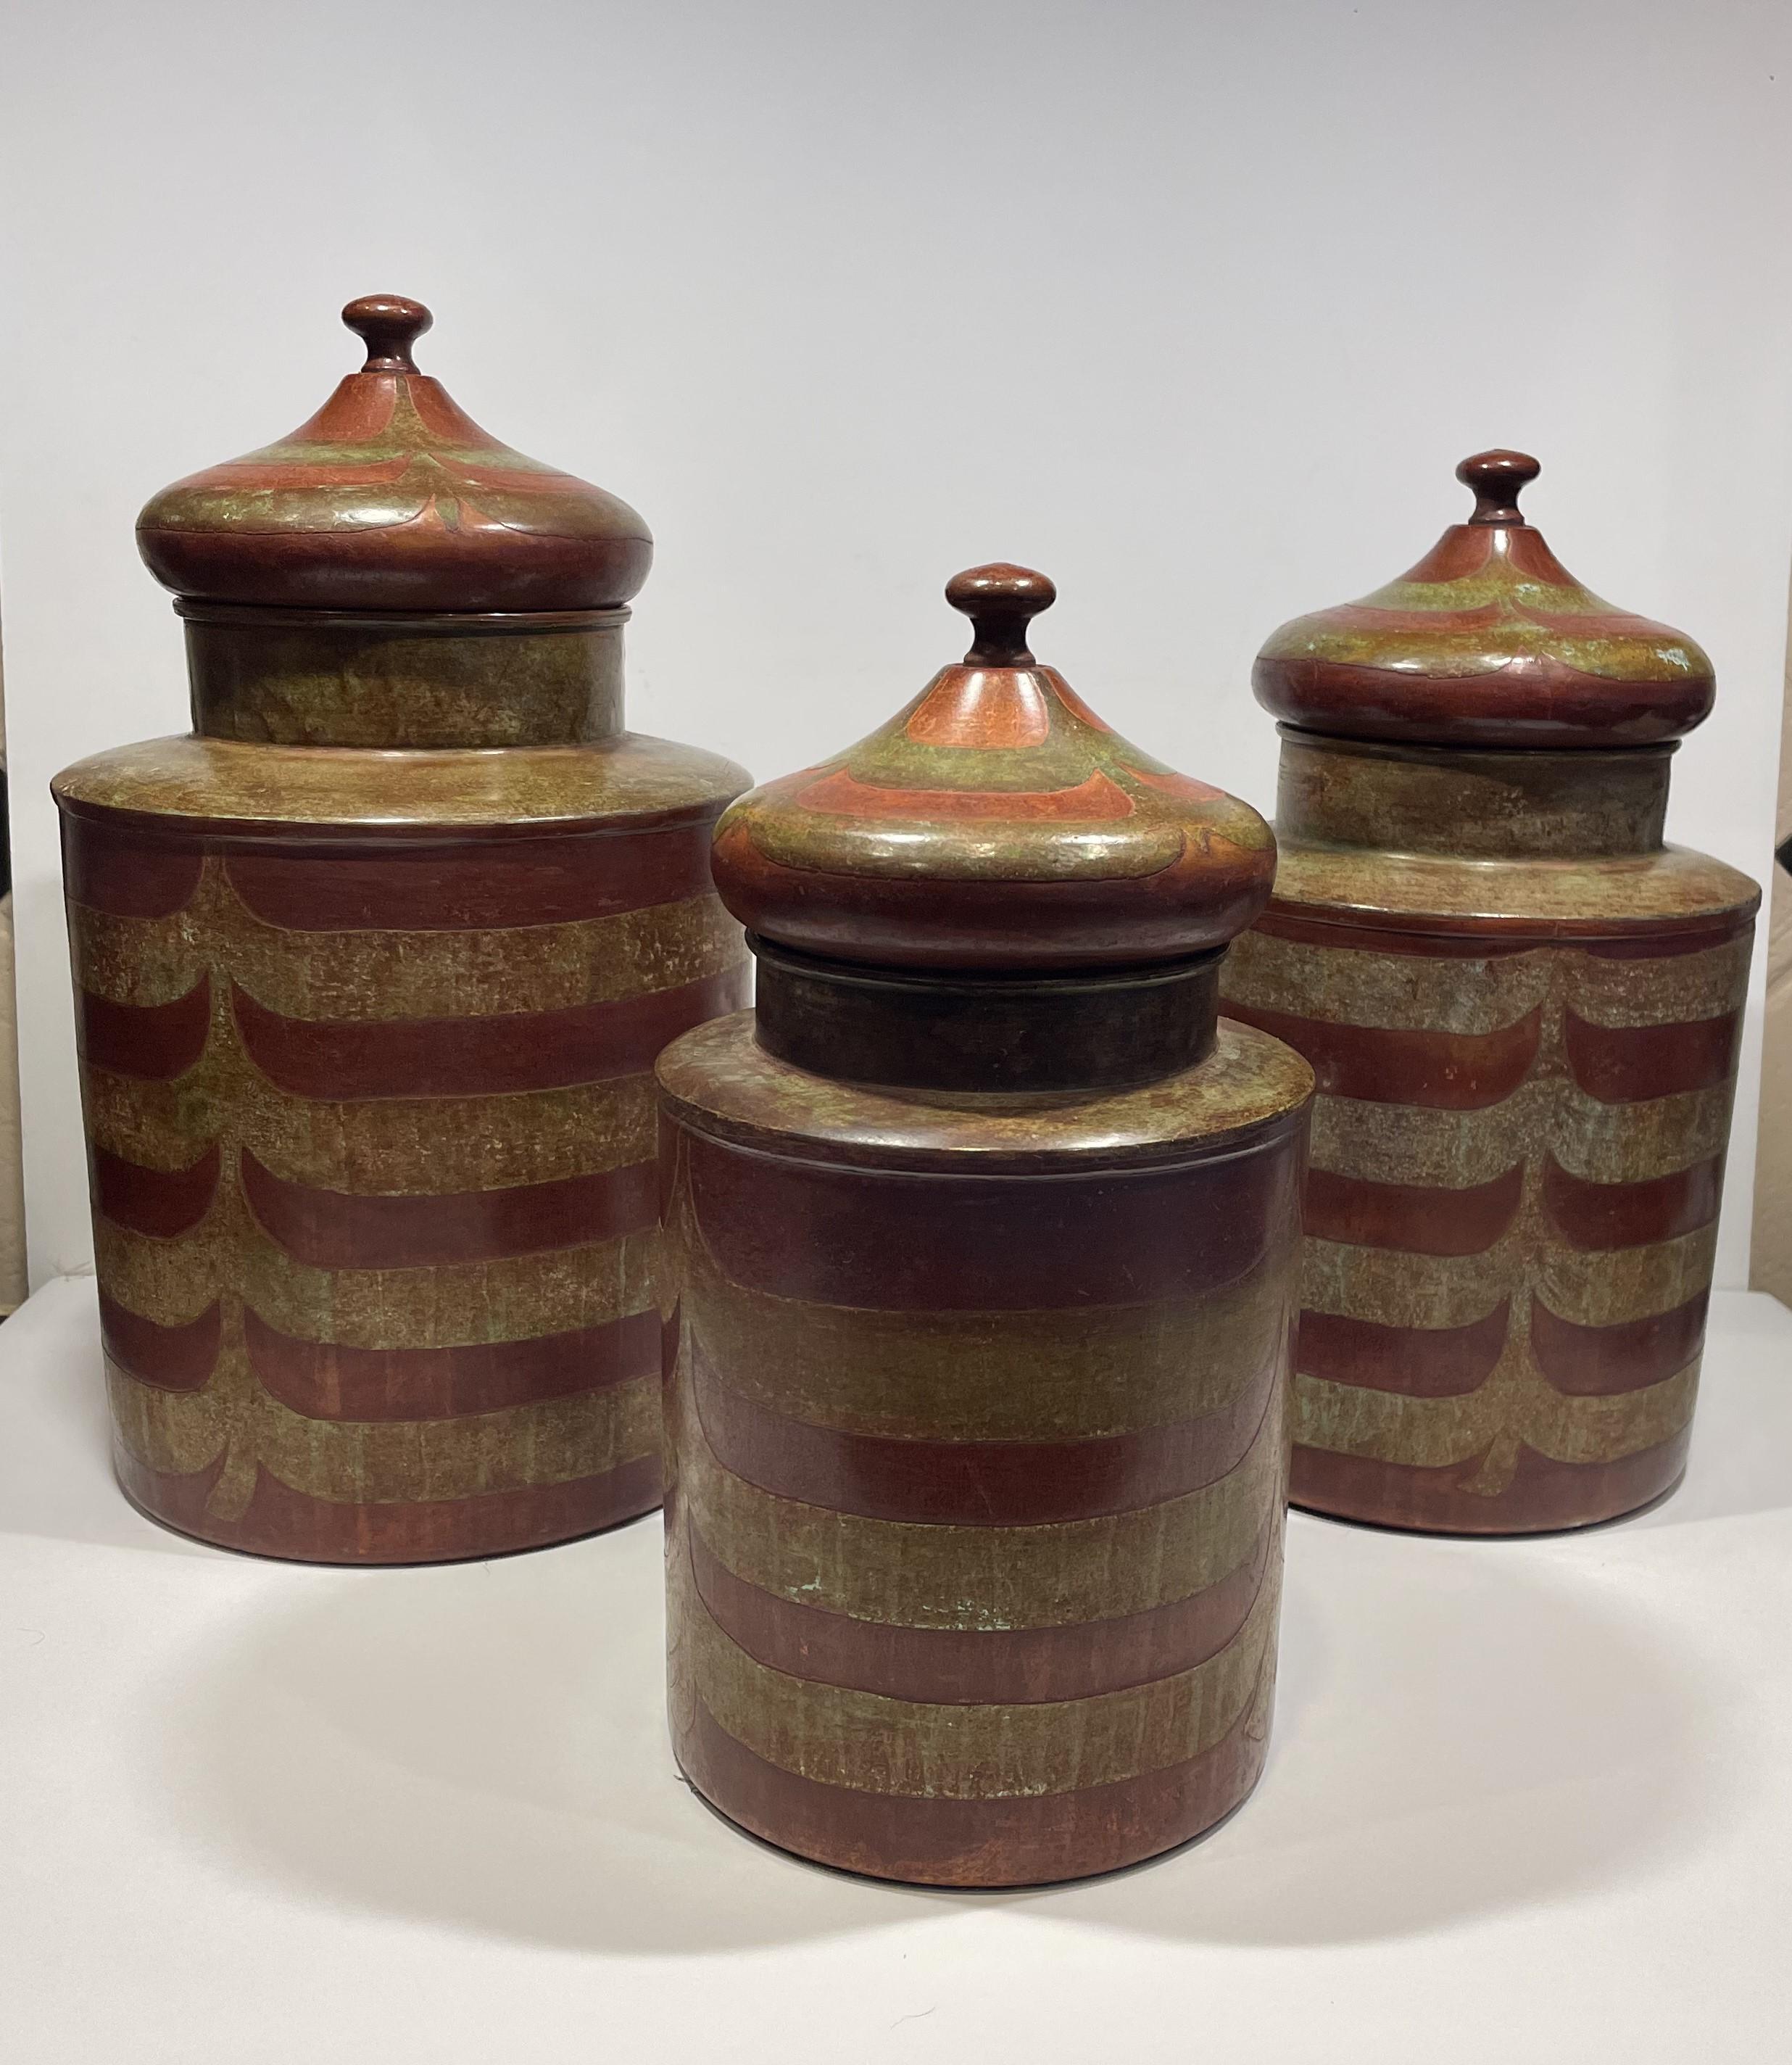 These richly-colored cannisters evoke a warm and calming feeling similar to looking at an abstract color-block painting by Mark Rothko. The lovely domed lids call up images of the elegant domes dotted across the Indian landscape resting atop palaces